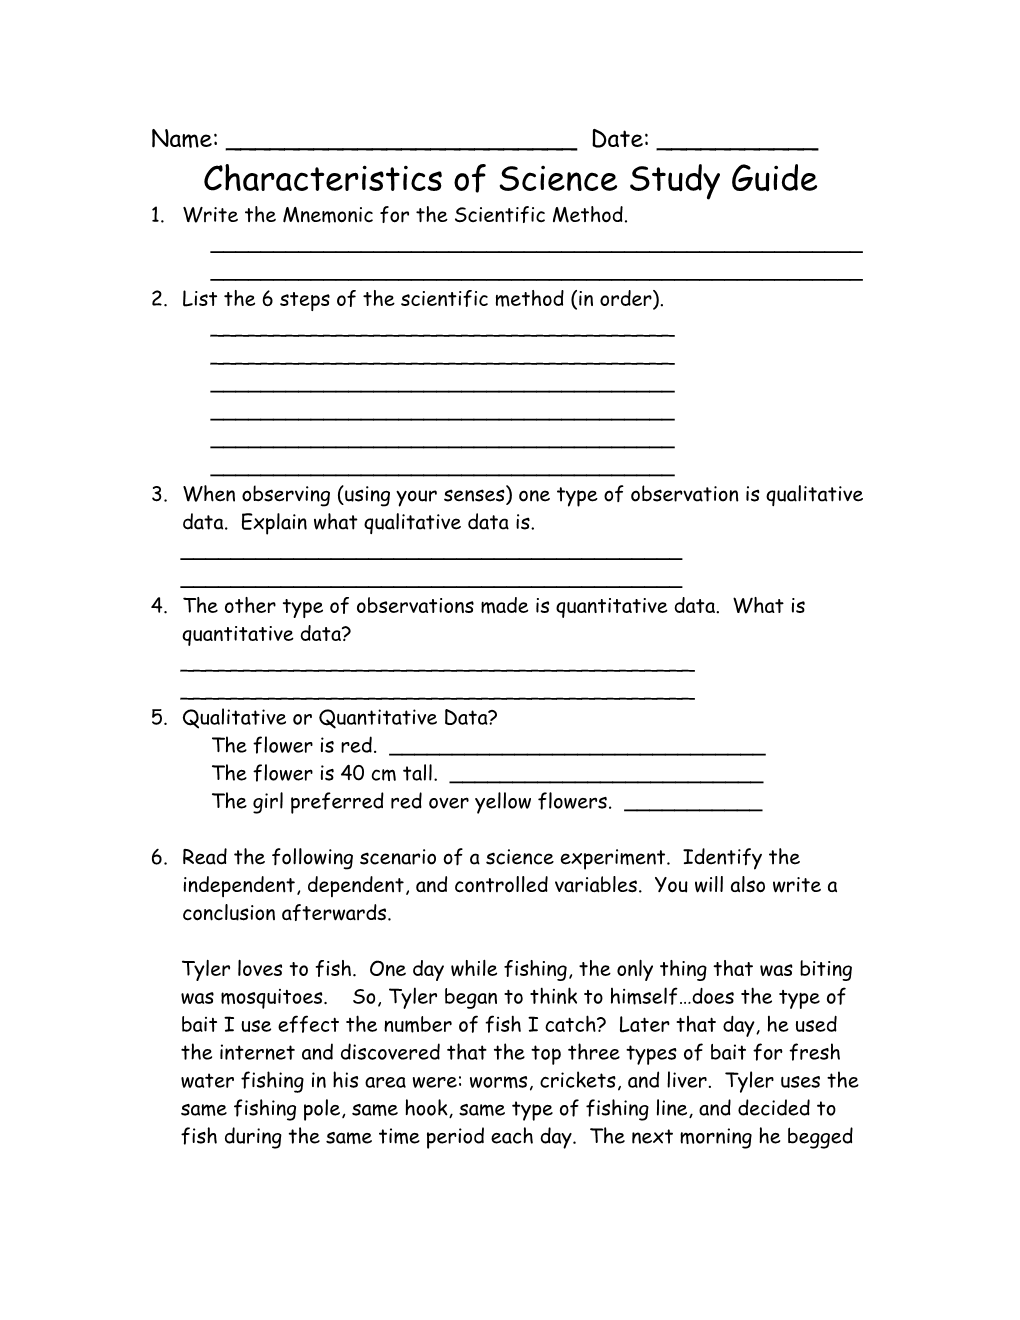 Characteristics of Science Study Guide